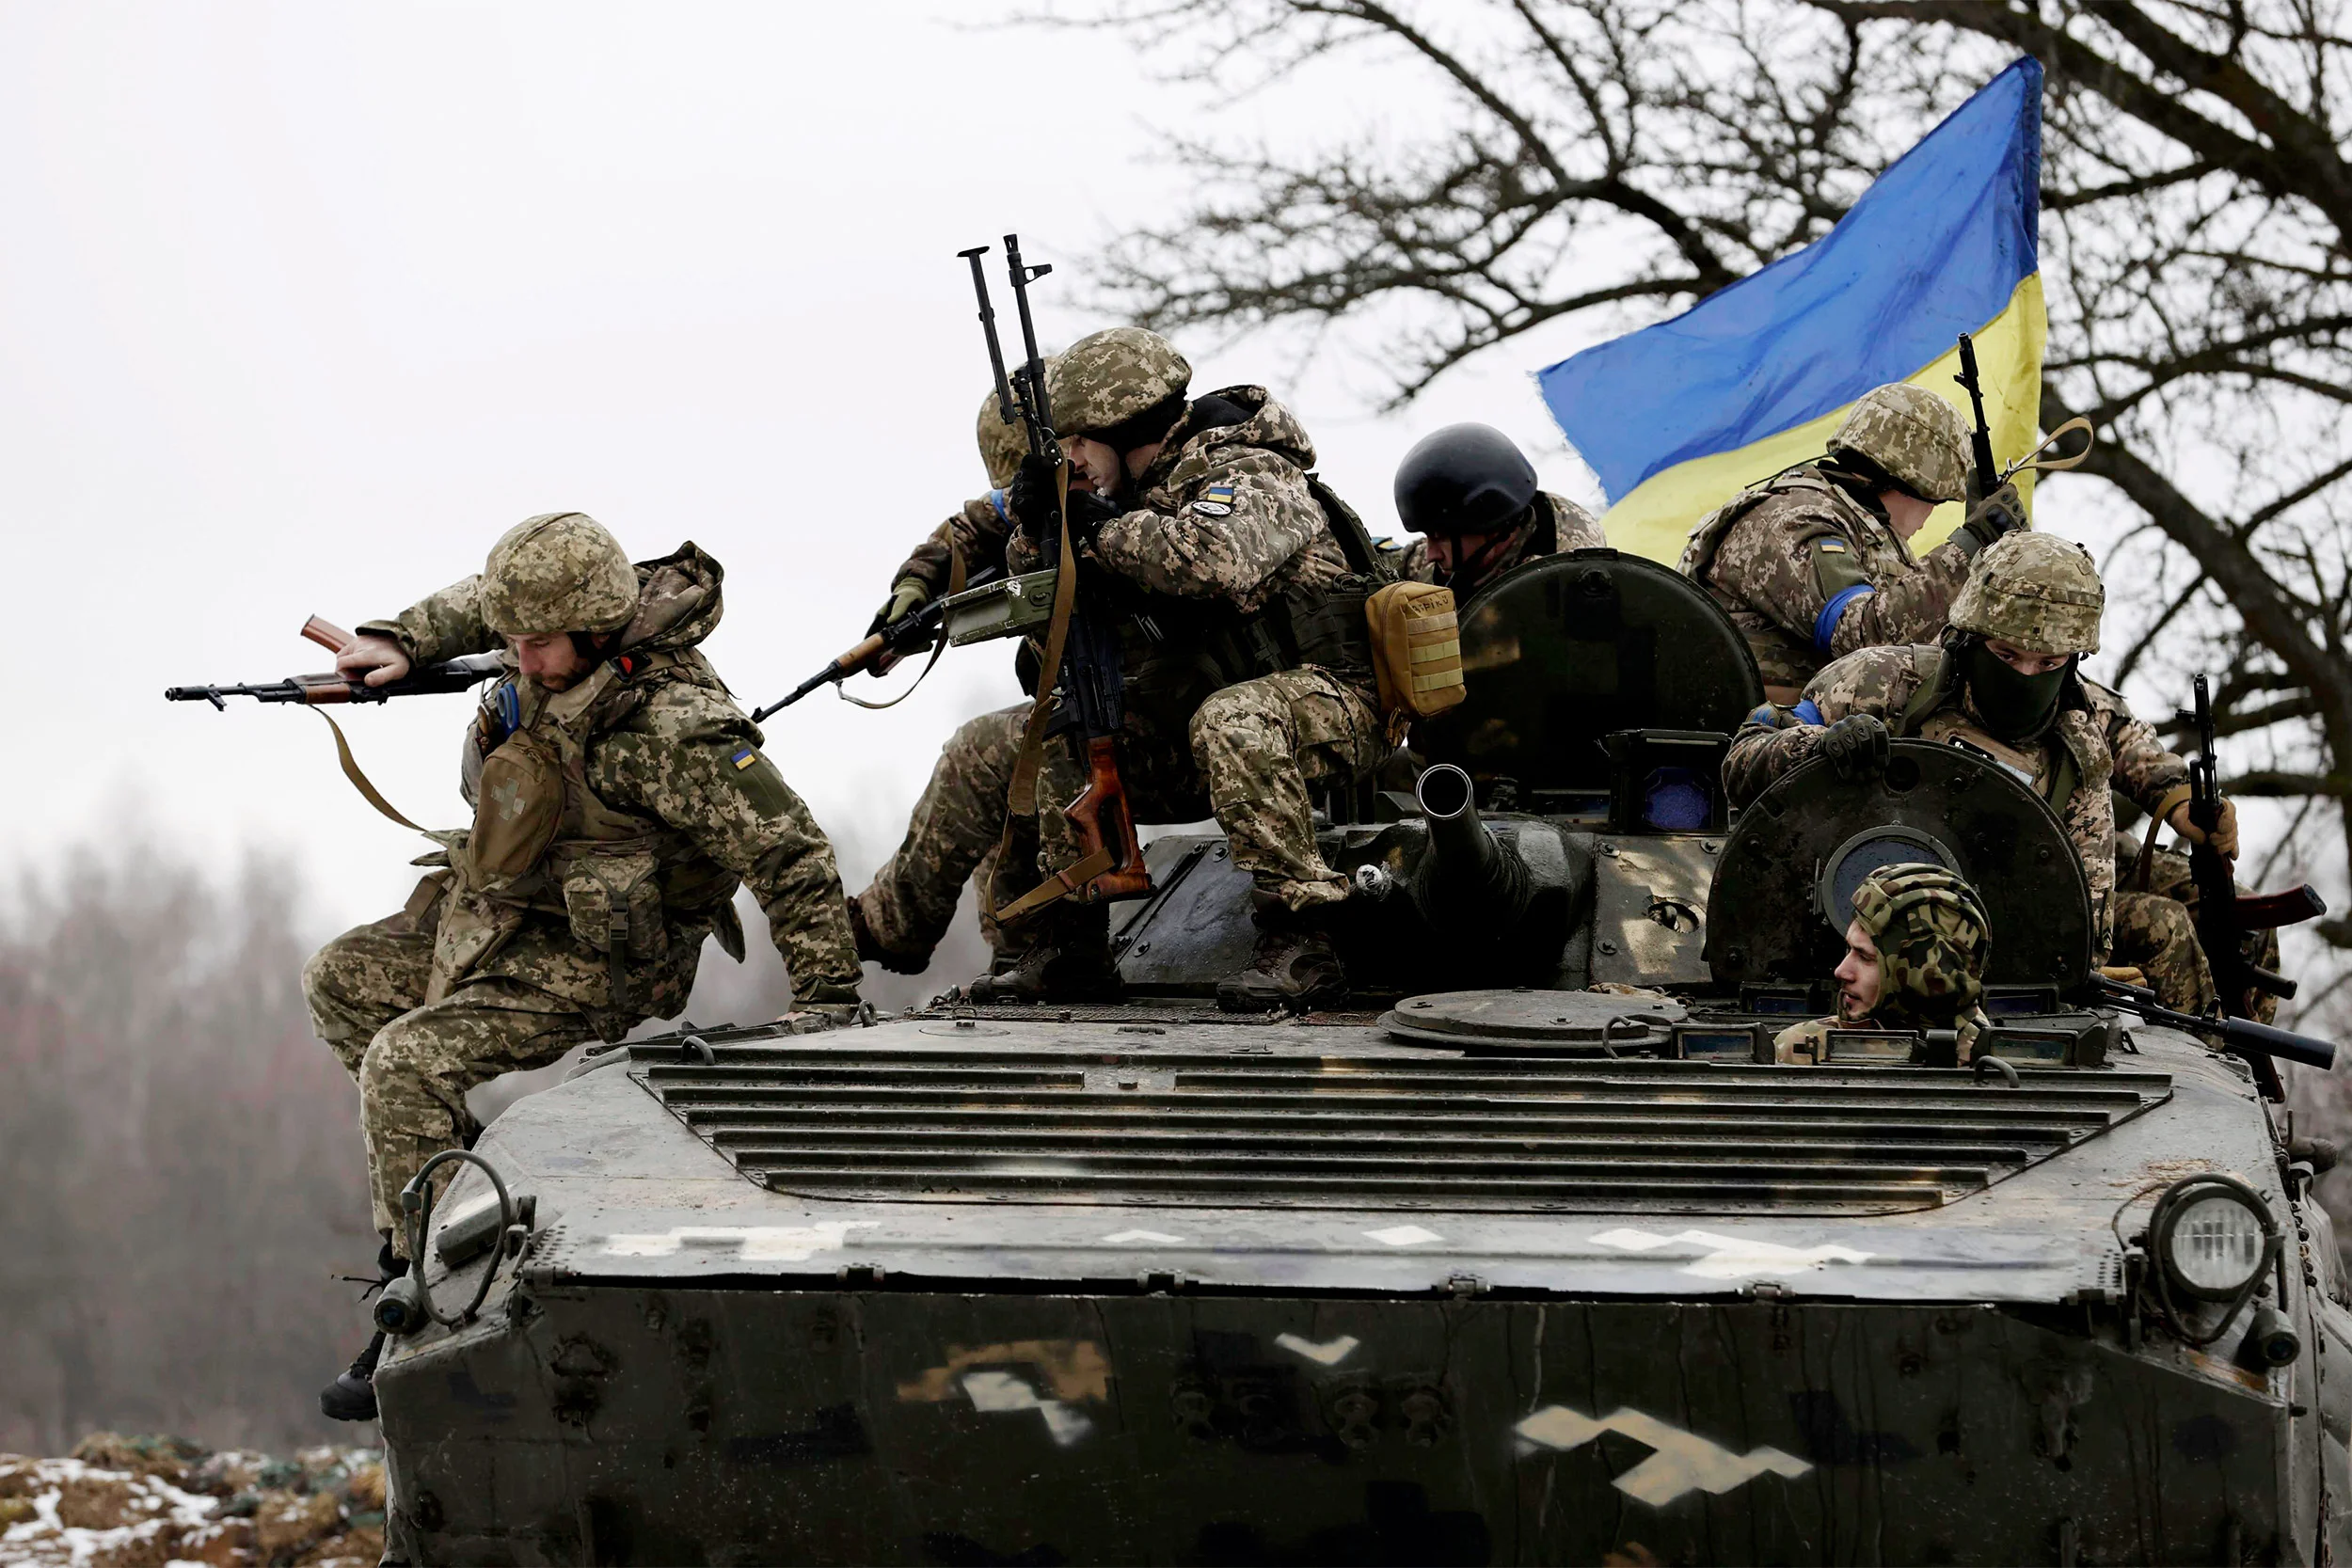 Ukraine Heads Into the Second Year of the Defensive War